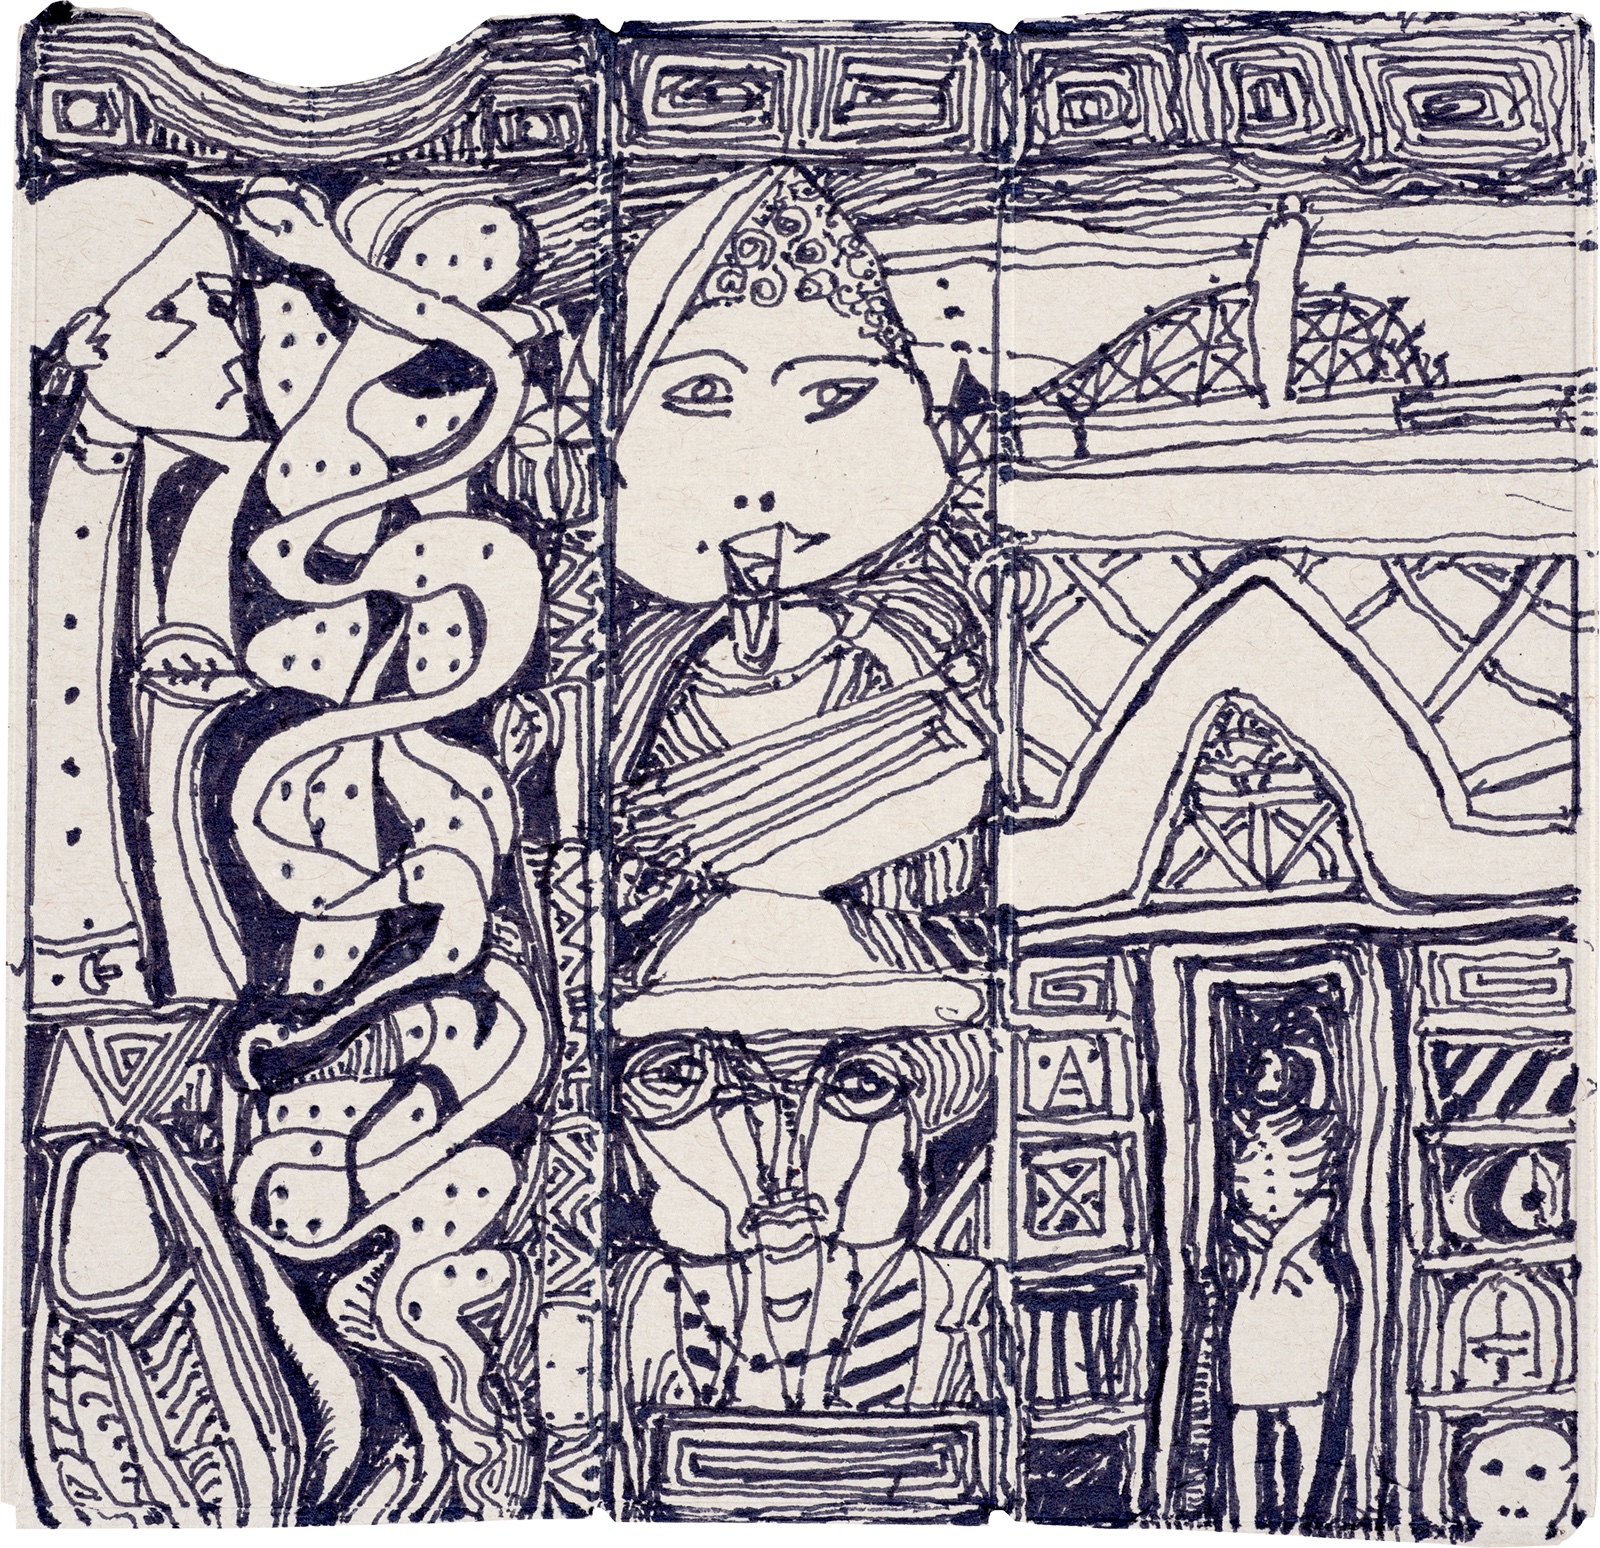 An elaborate drawing including faces, spirals, snakes, and geometric forms